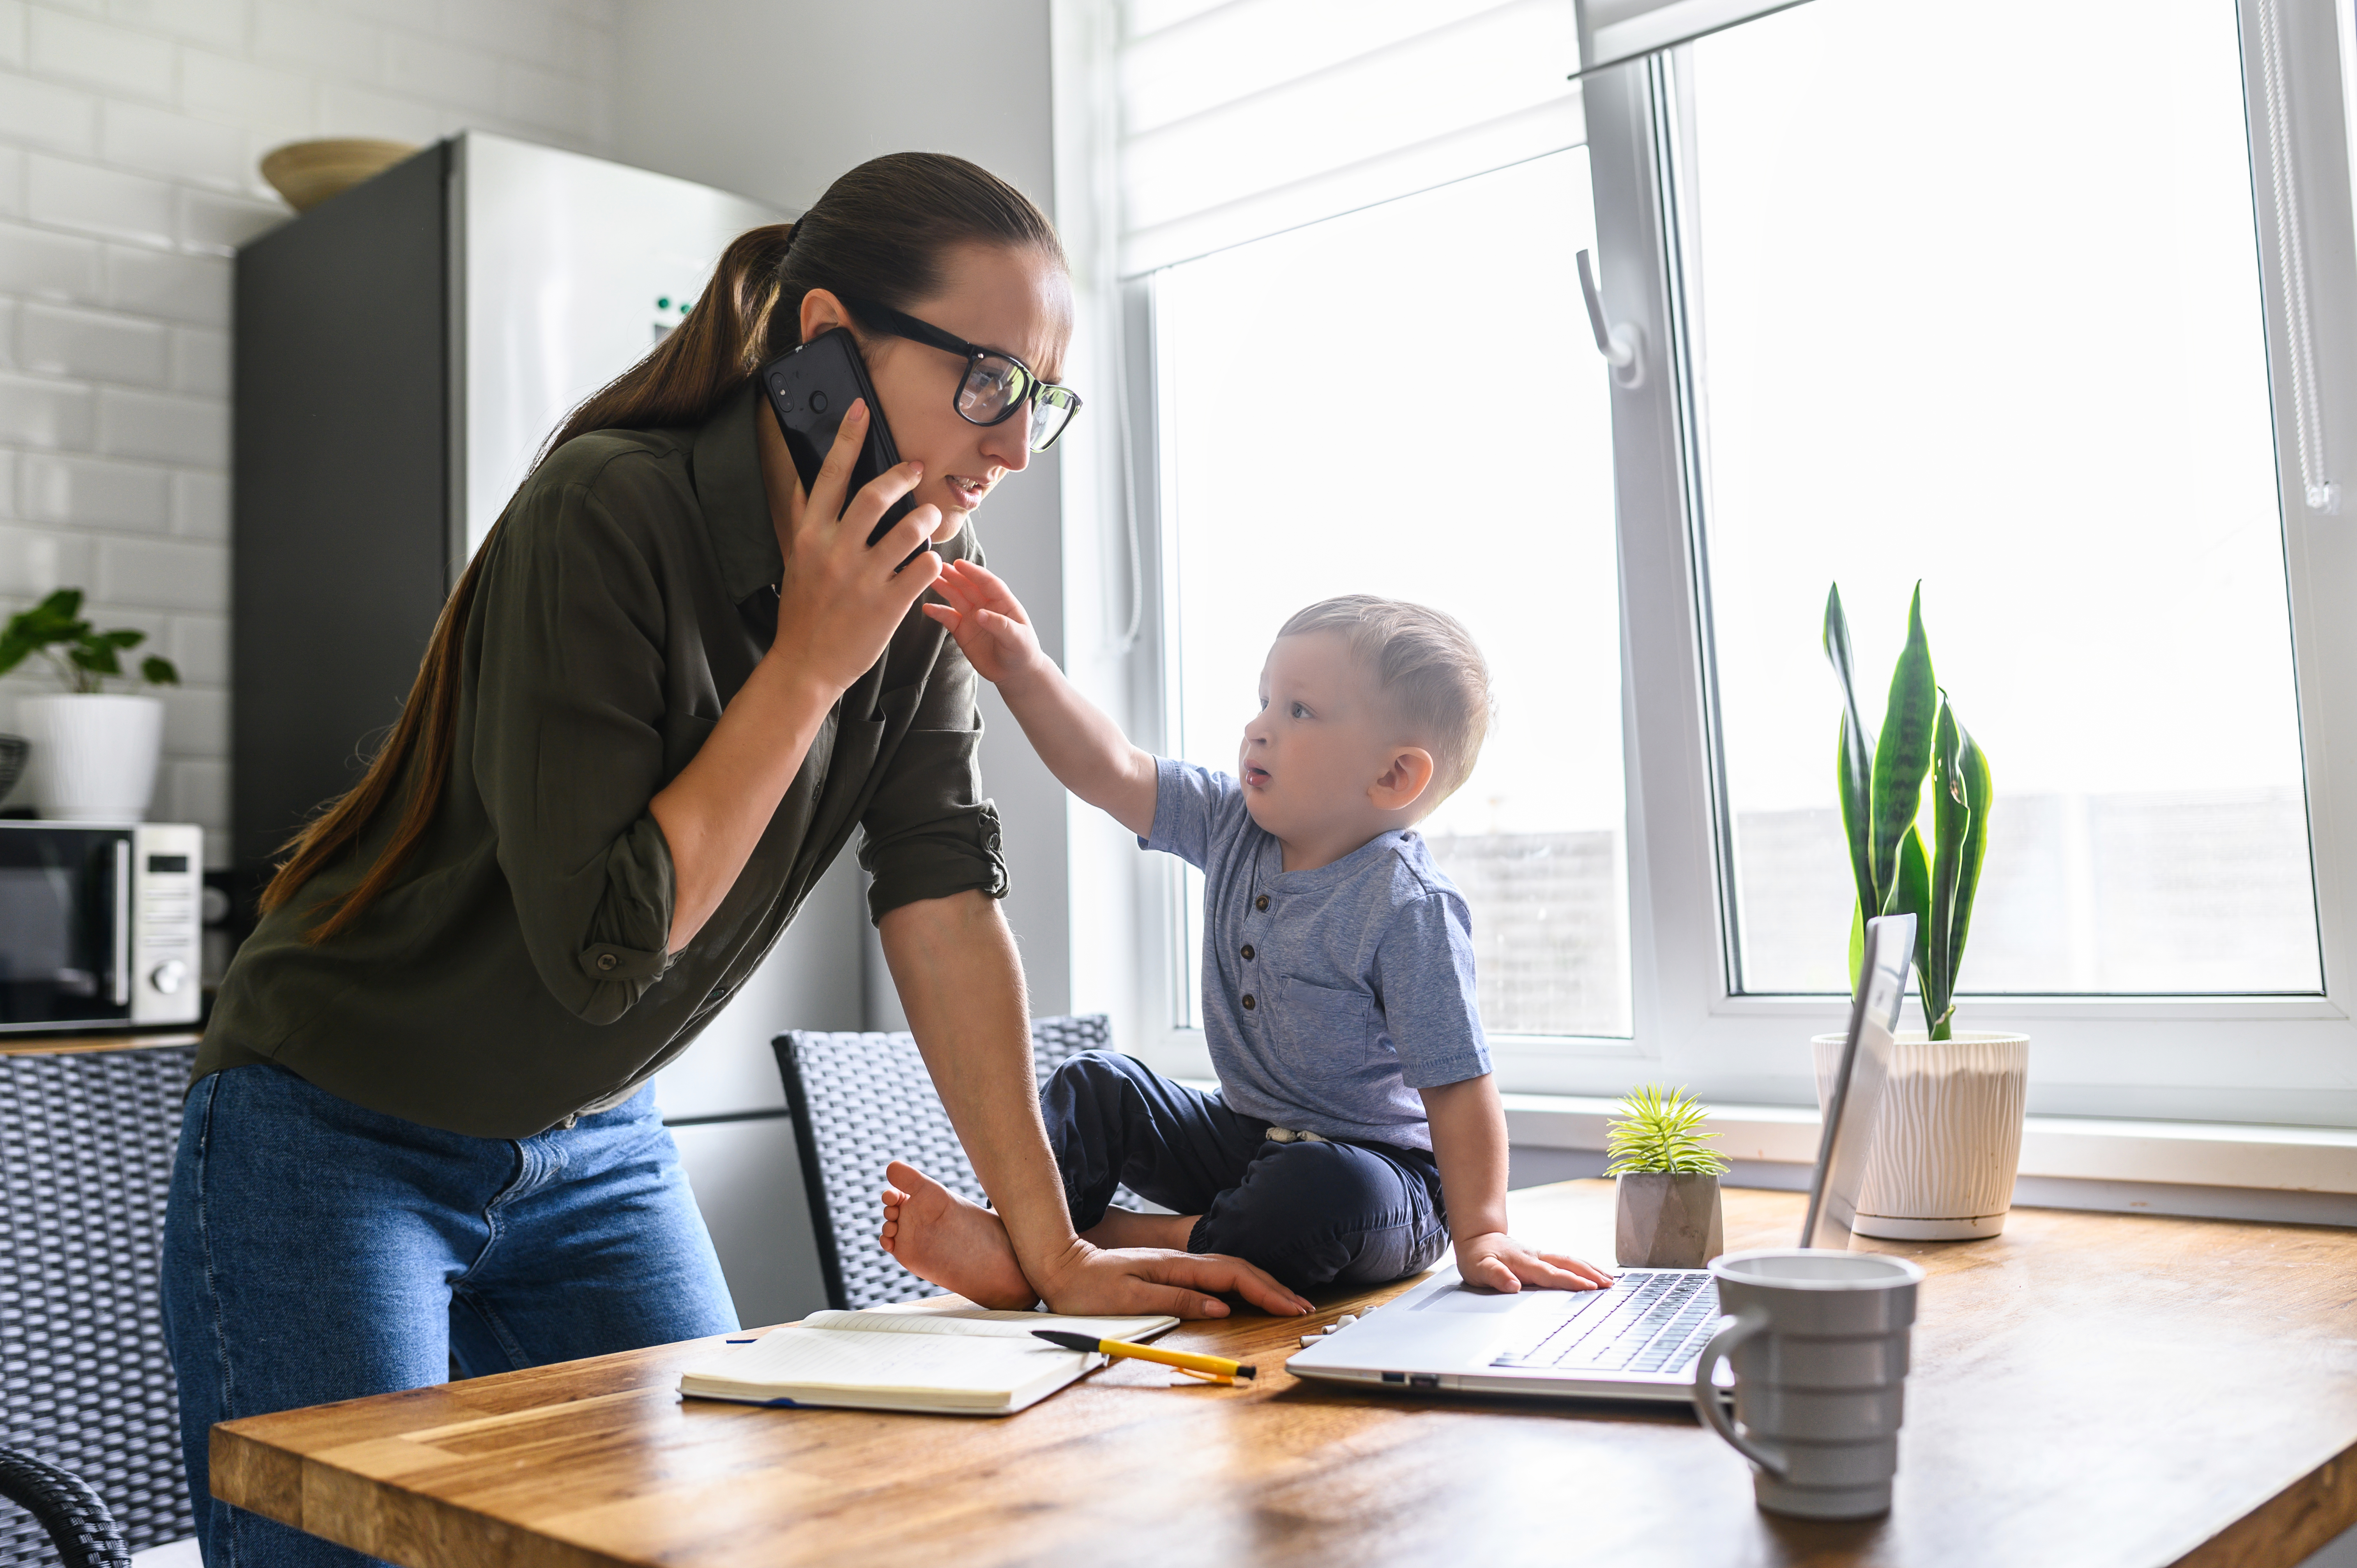 Young mother on the phone as her young son reaches for it | Source: Shutterstock